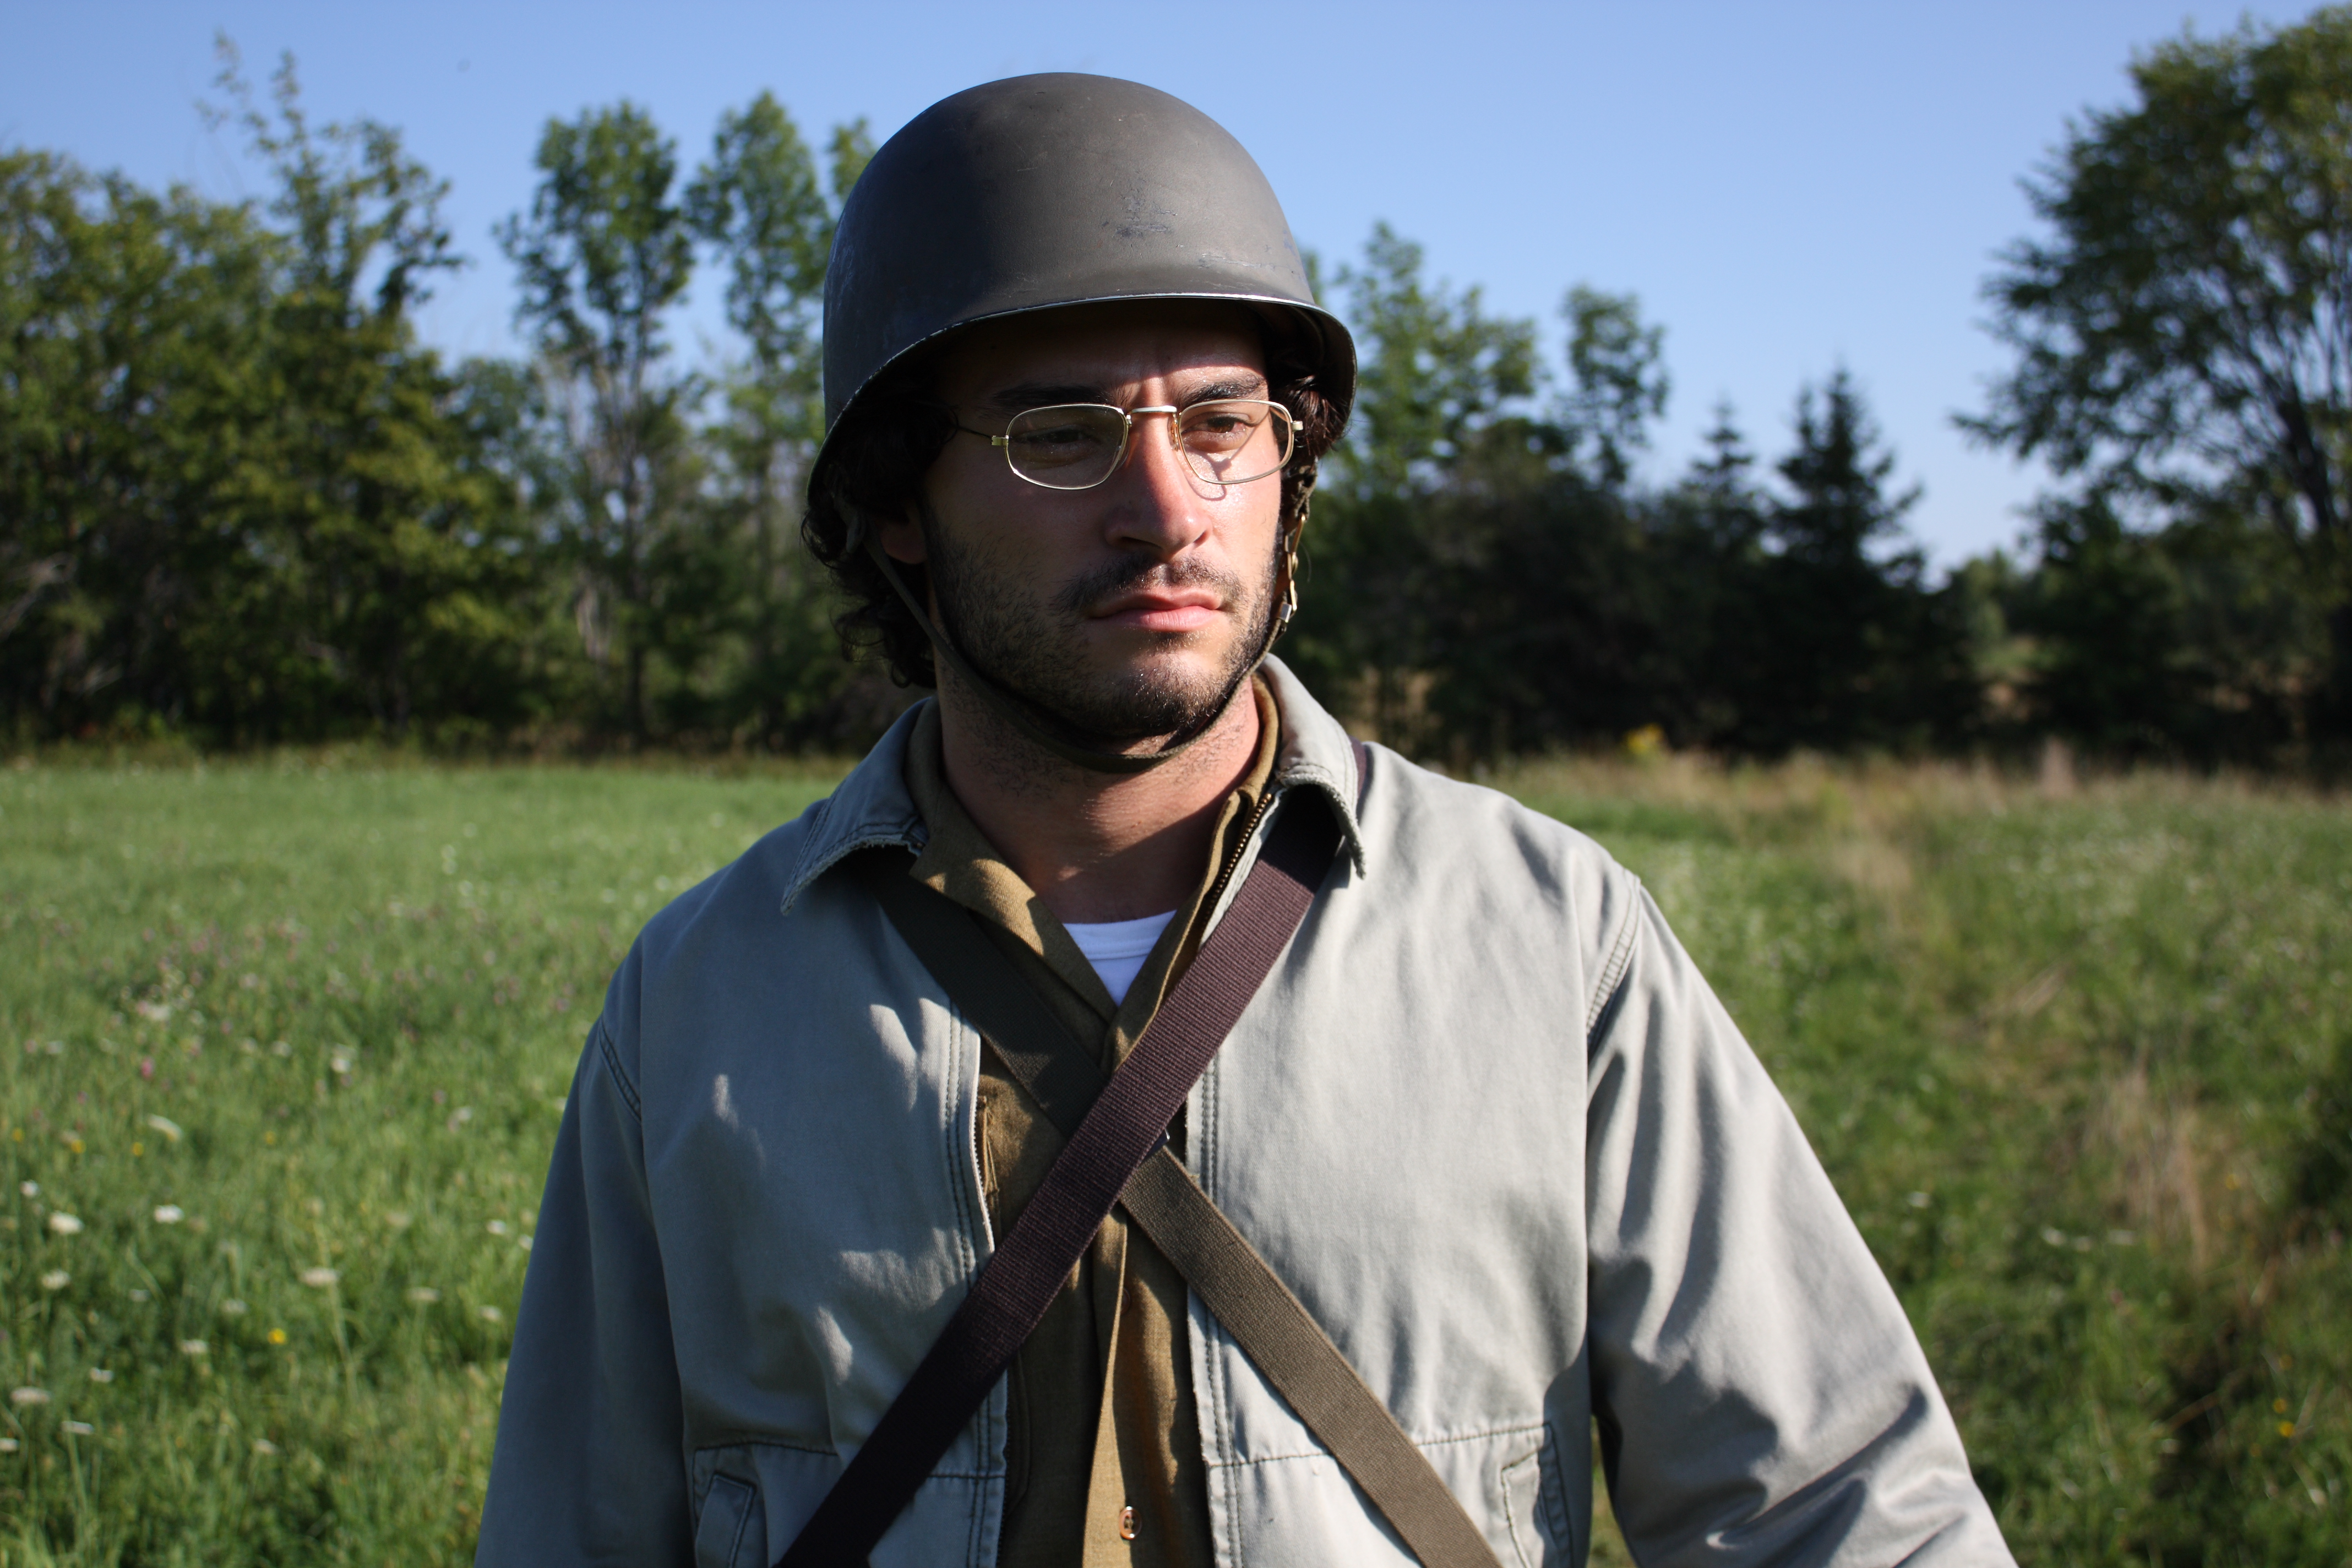 Dan Palermo as Specs in Atheists in Foxholes